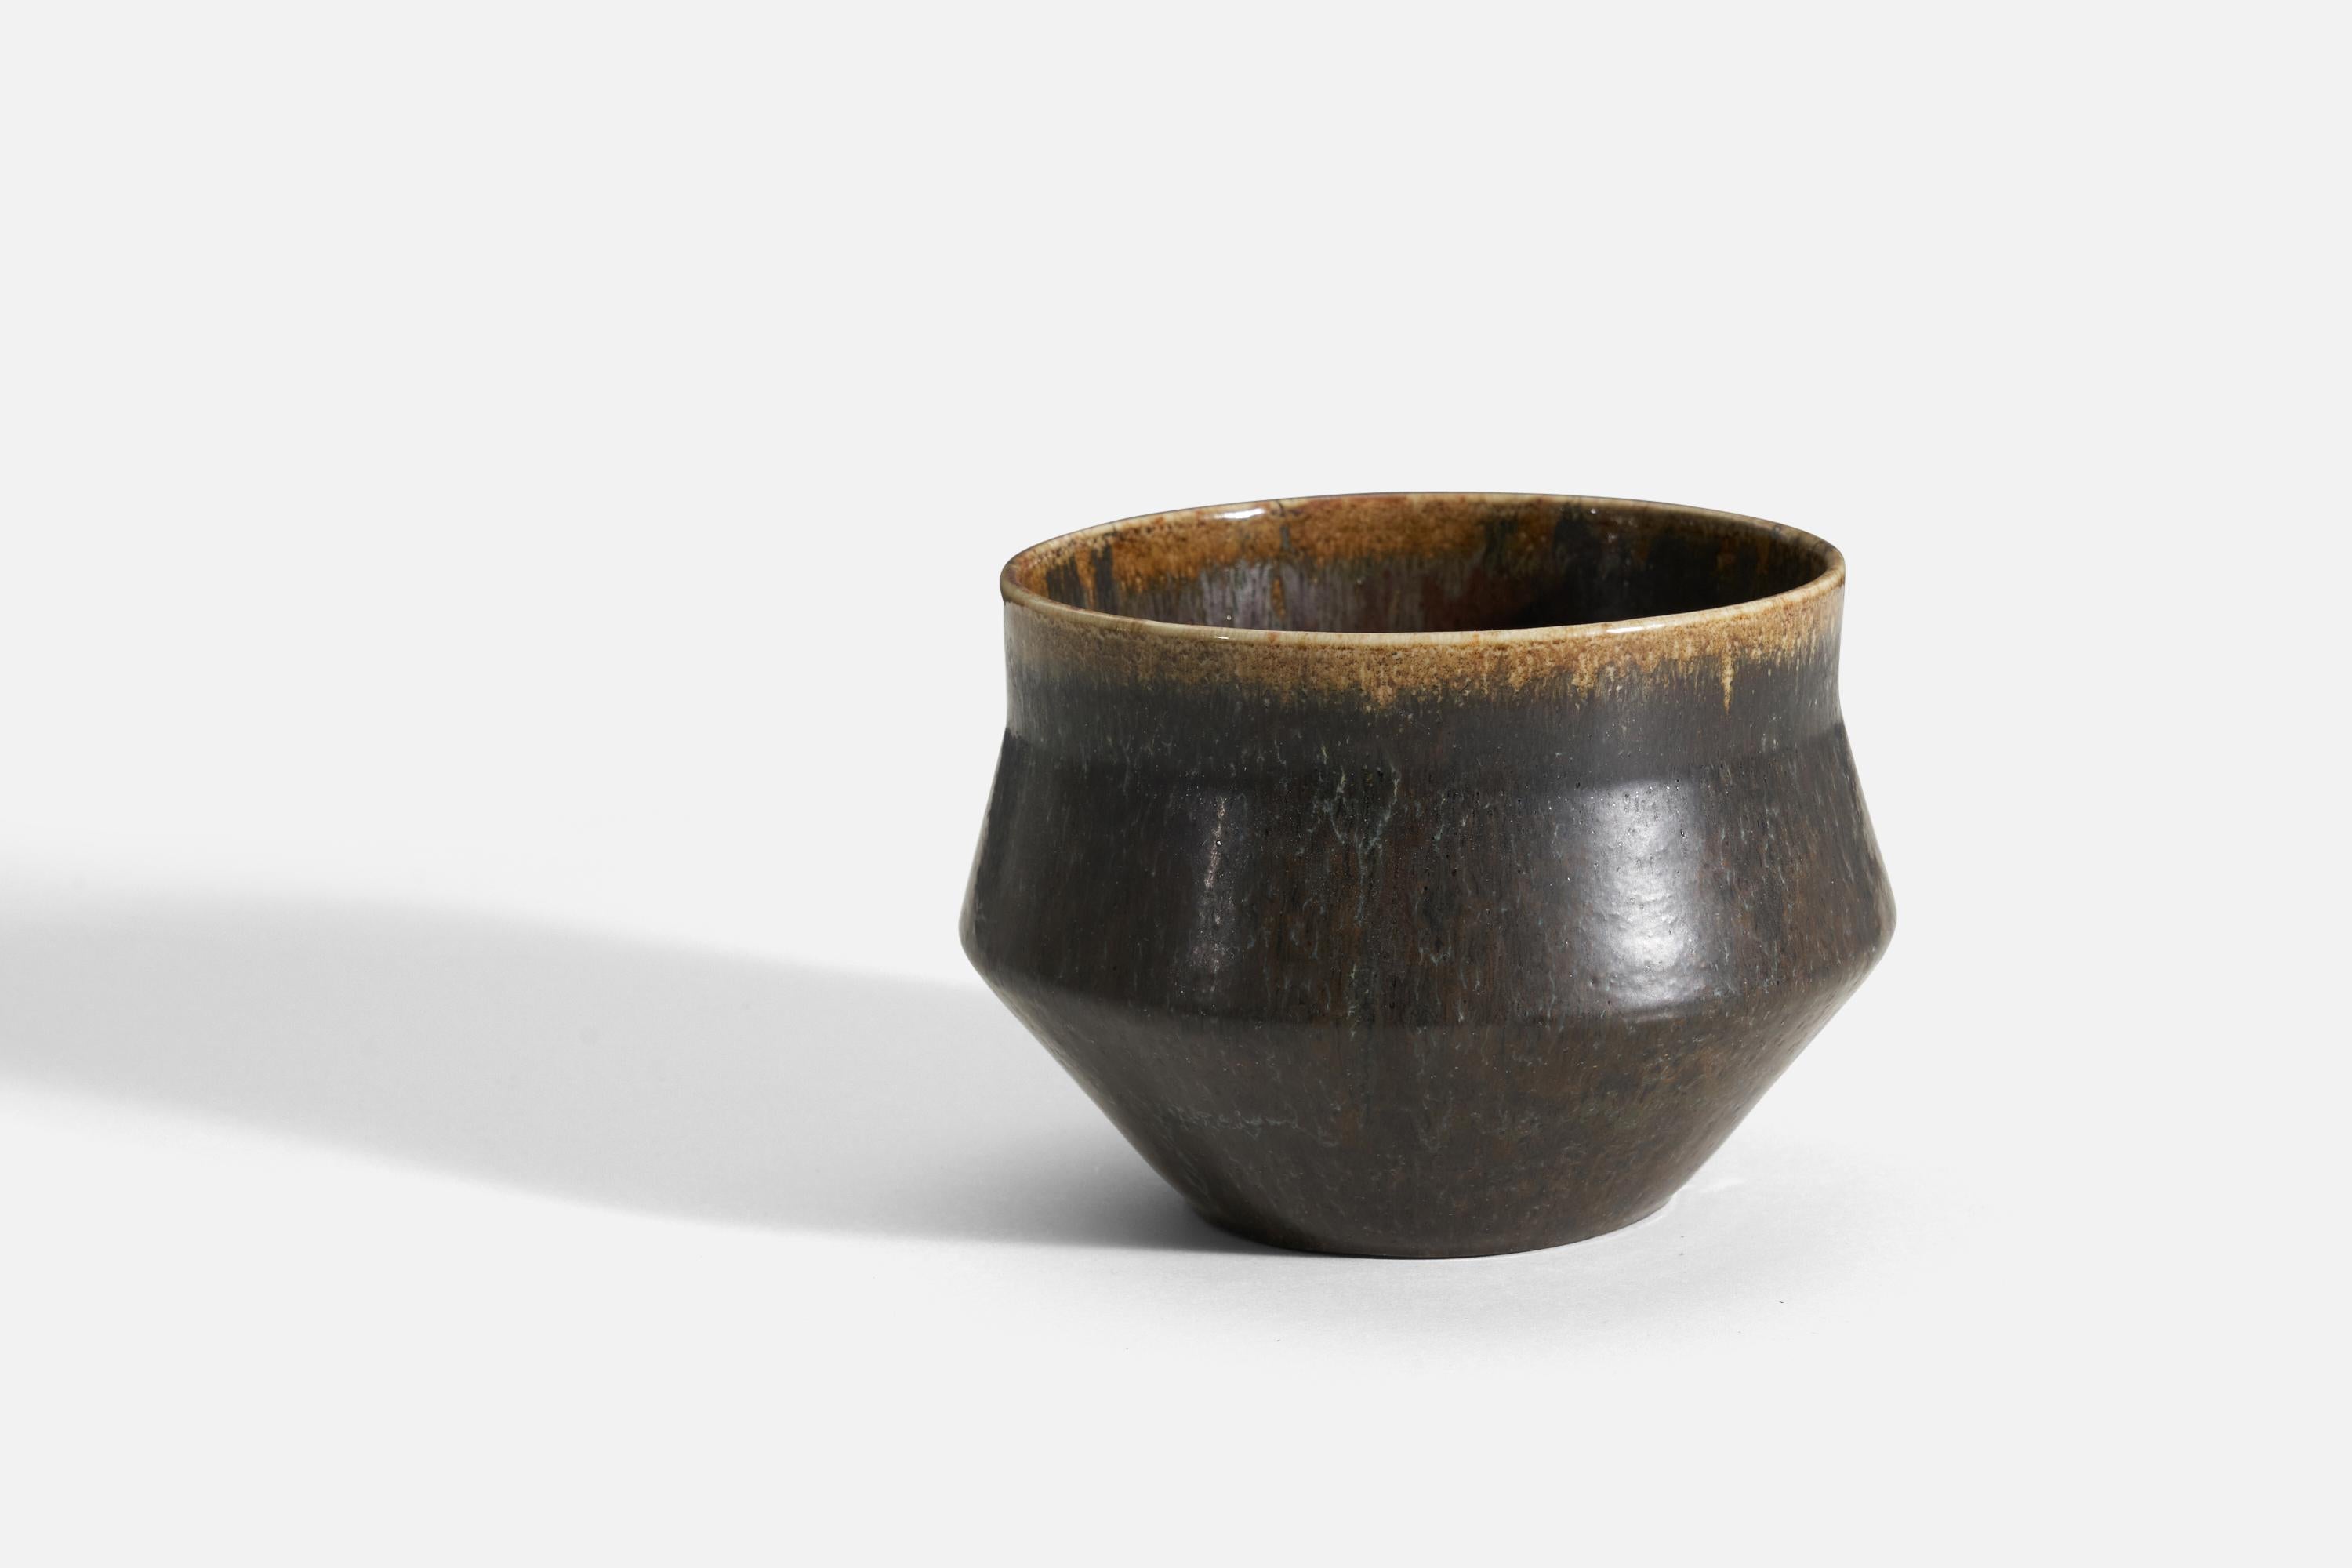 A glazed stoneware bowl designed by Carl-Harry Stålhane for Rörstrand, Sweden, 1960s. The stamp and signature on the underside indicate the bowl is unique.